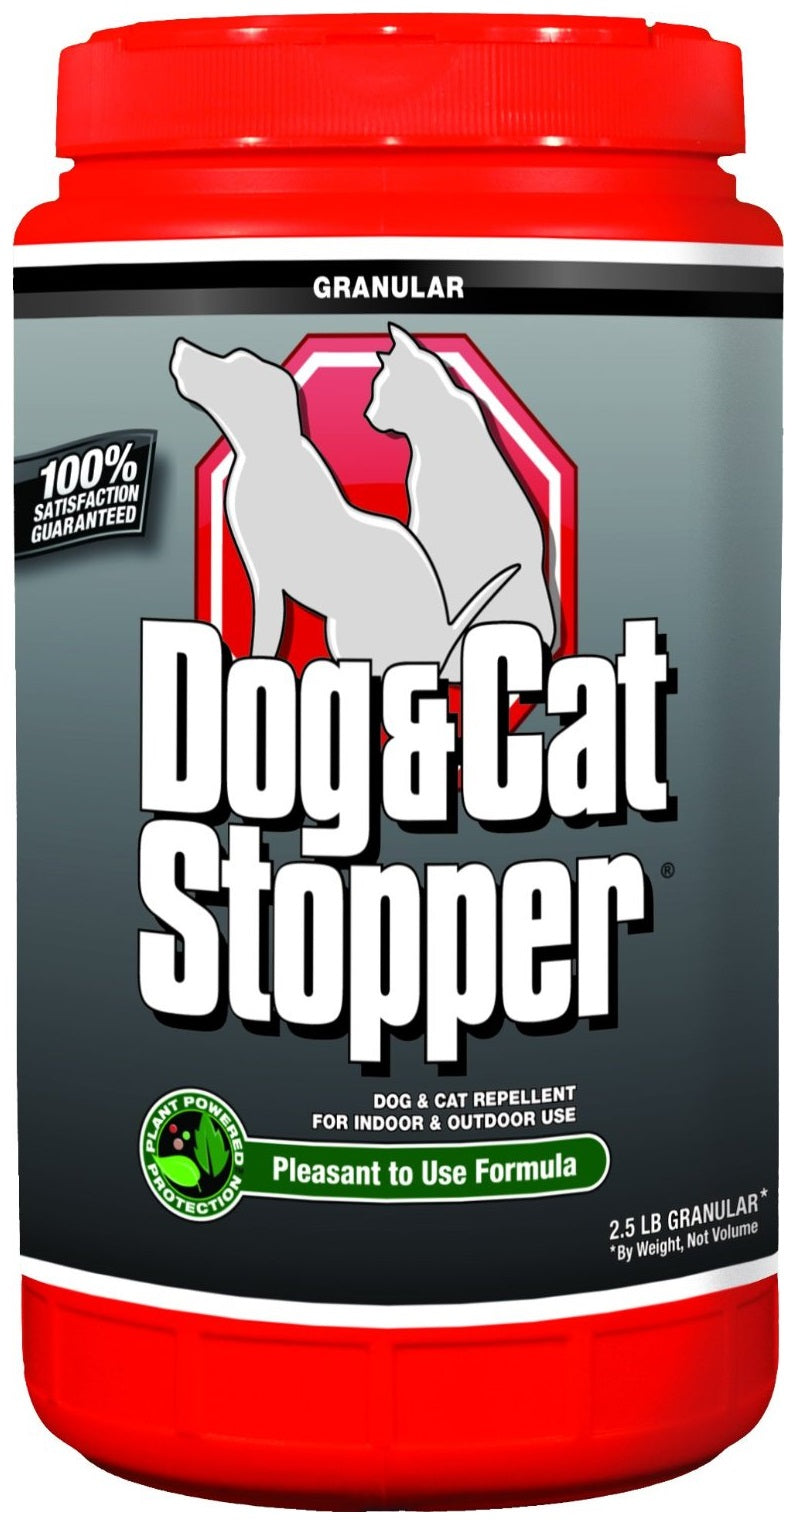 Buy dog & cat stopper - Online store for pest control, animal repellent in USA, on sale, low price, discount deals, coupon code